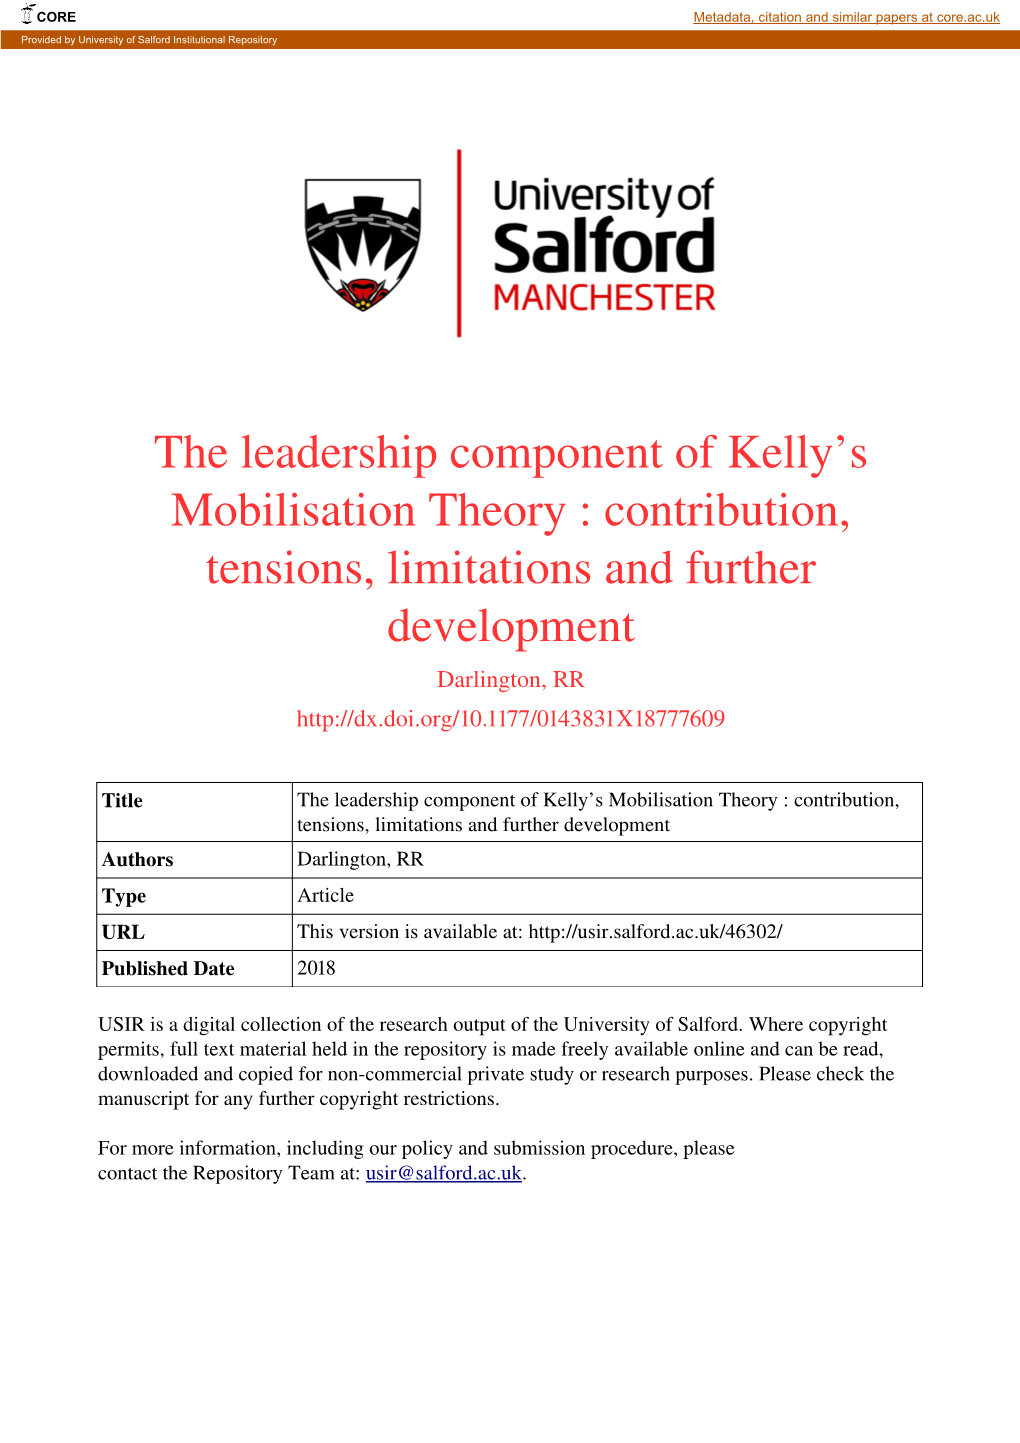 The Leadership Component of Kelly's Mobilisation Theory